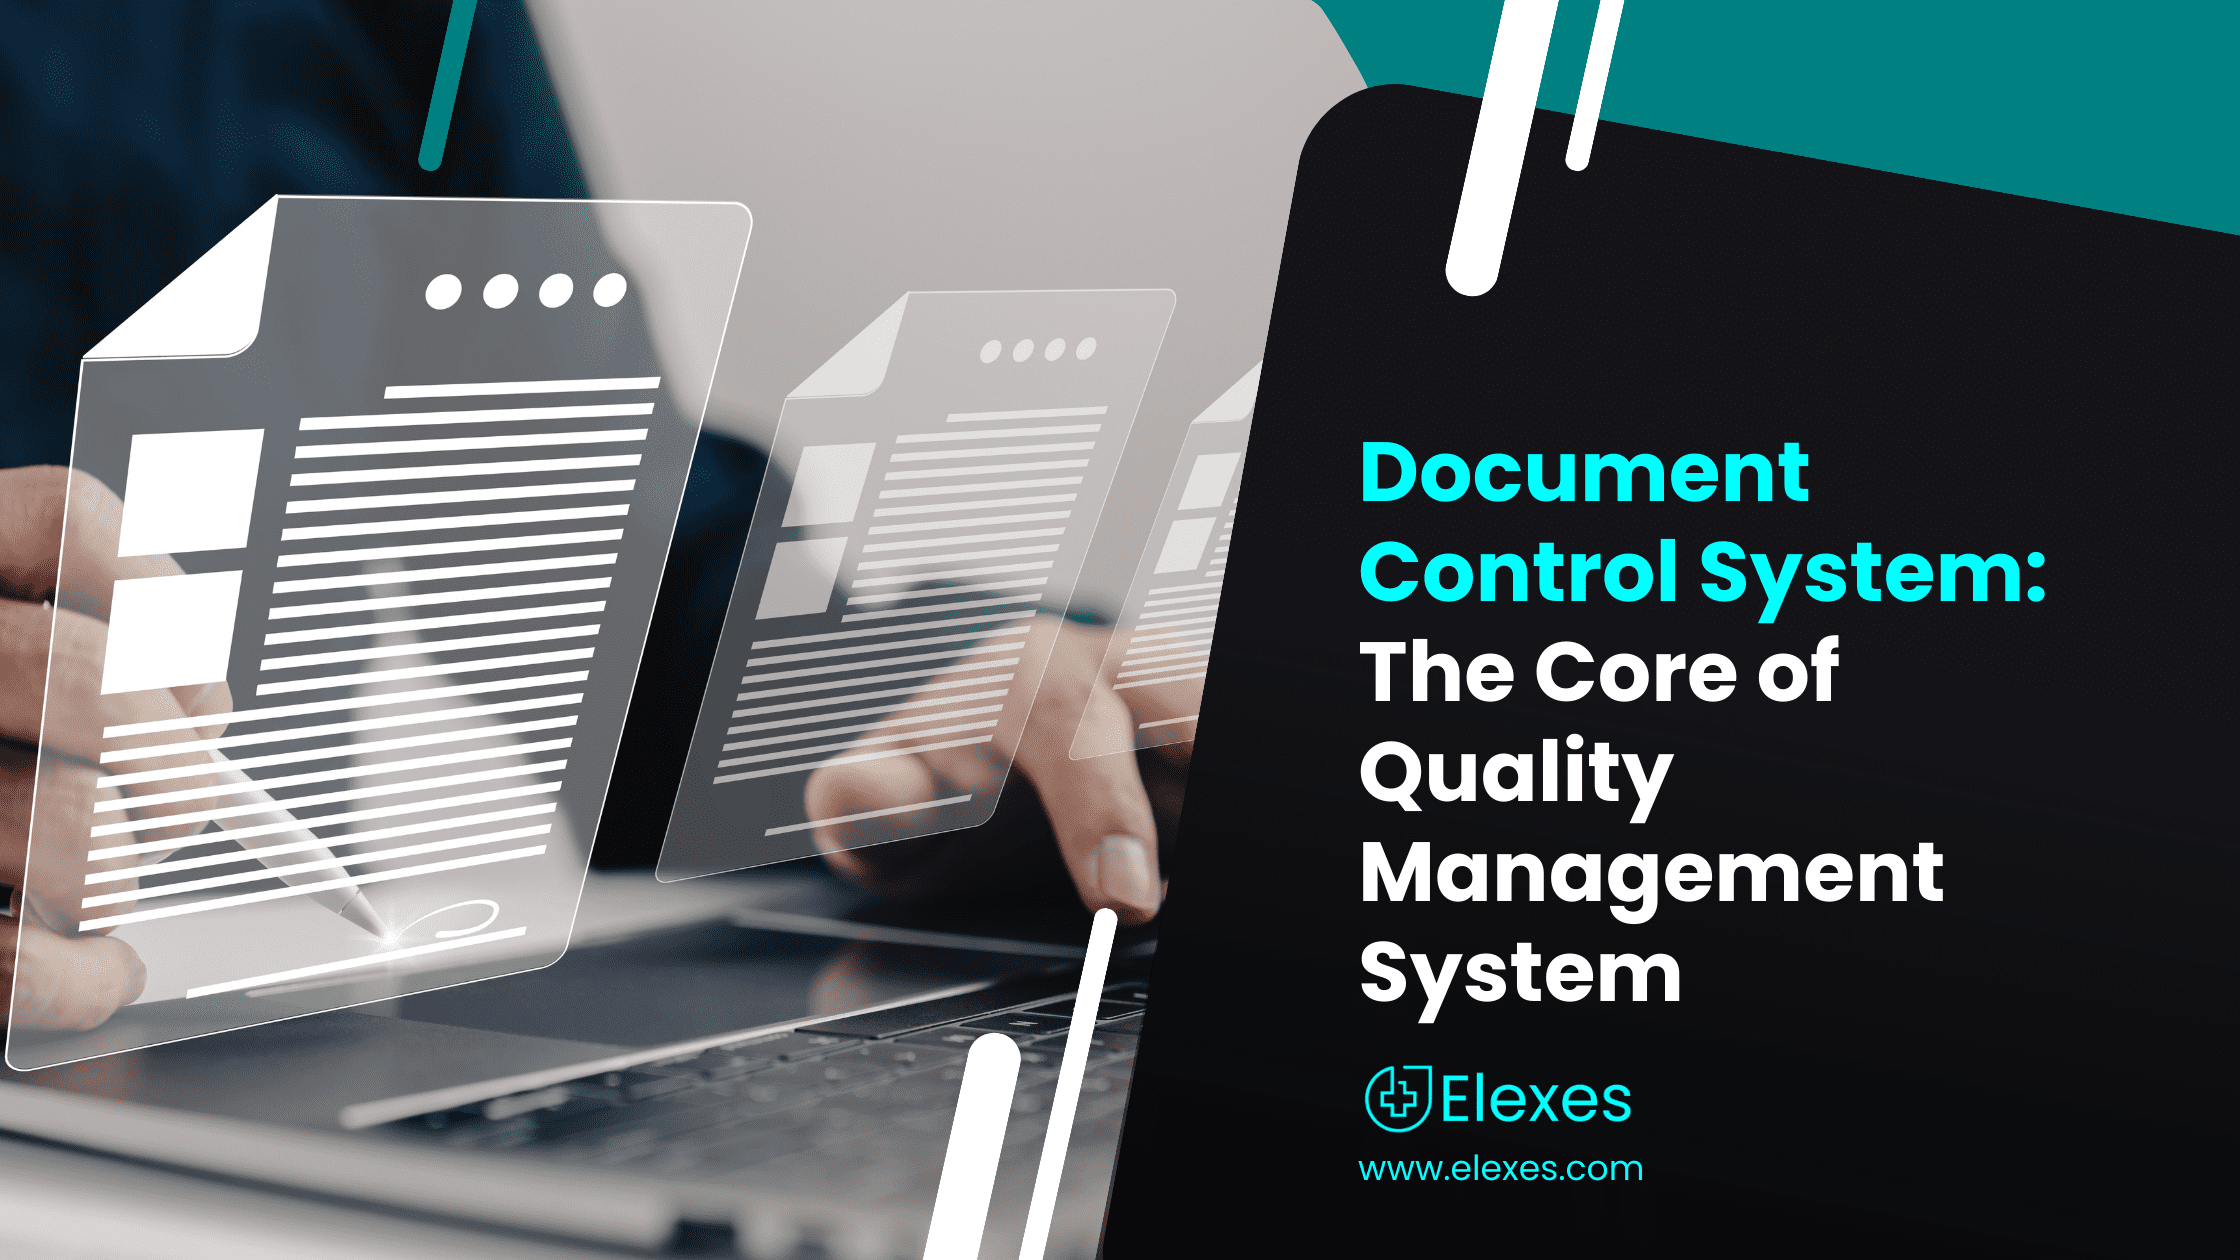 Document Control System: The Core of Quality Management System